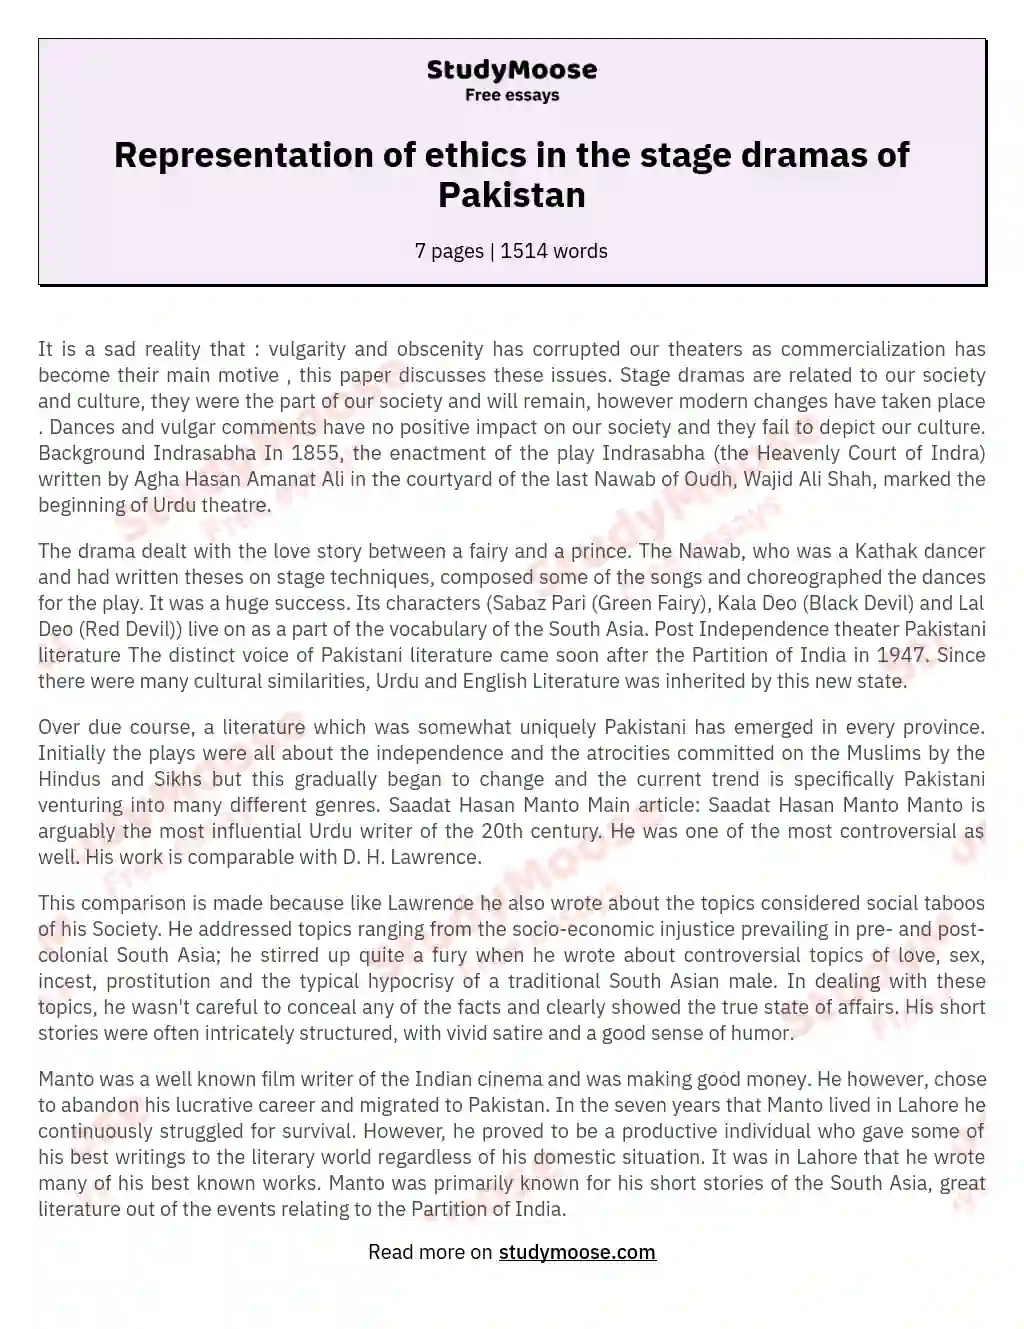 Representation of ethics in the stage dramas of Pakistan essay